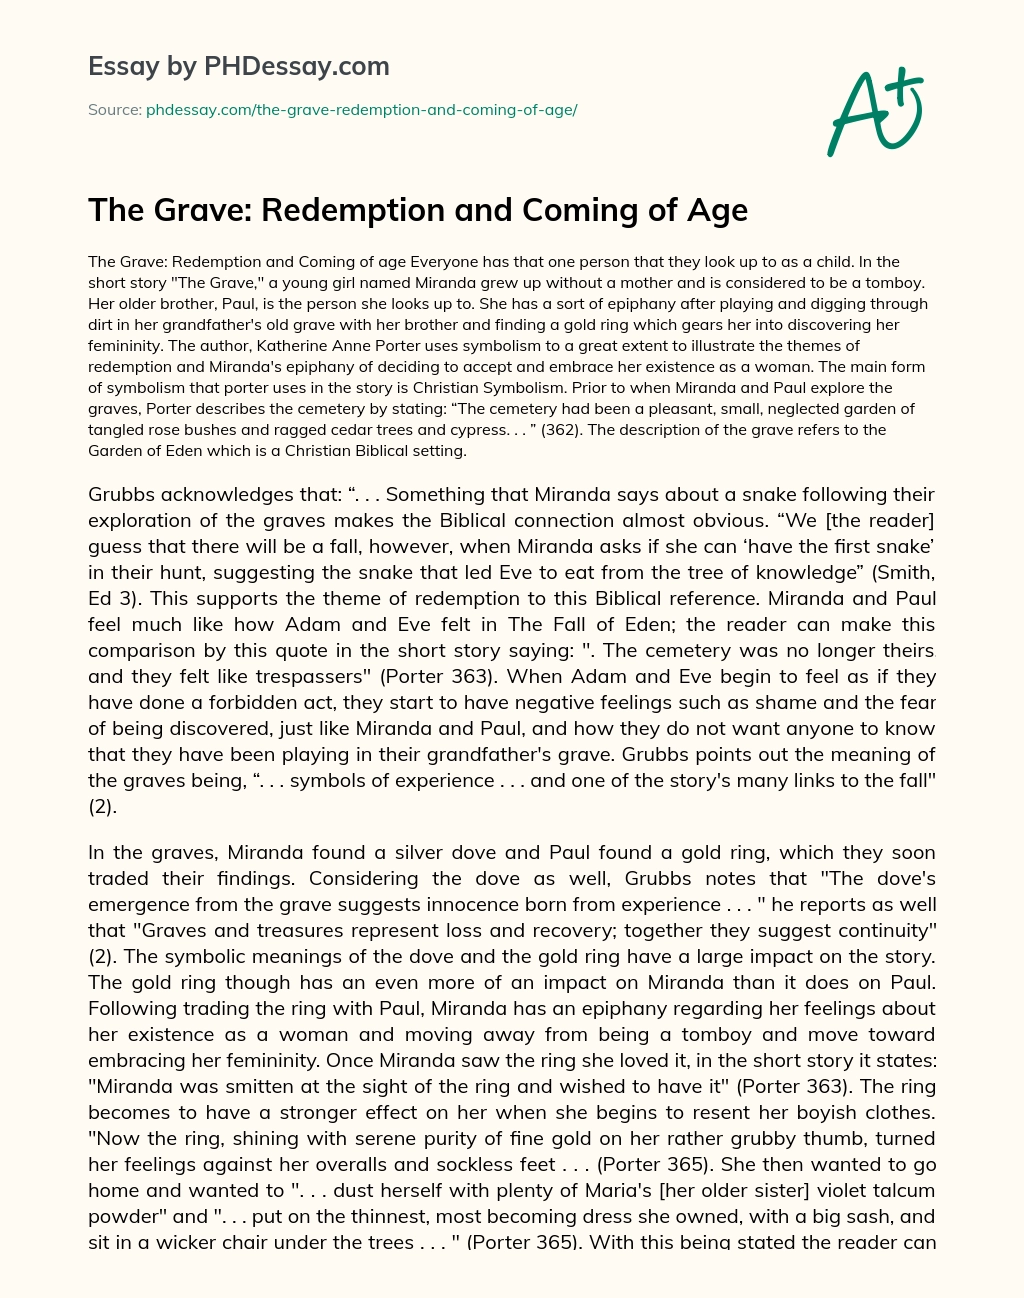 The Grave: Redemption and Coming of Age essay